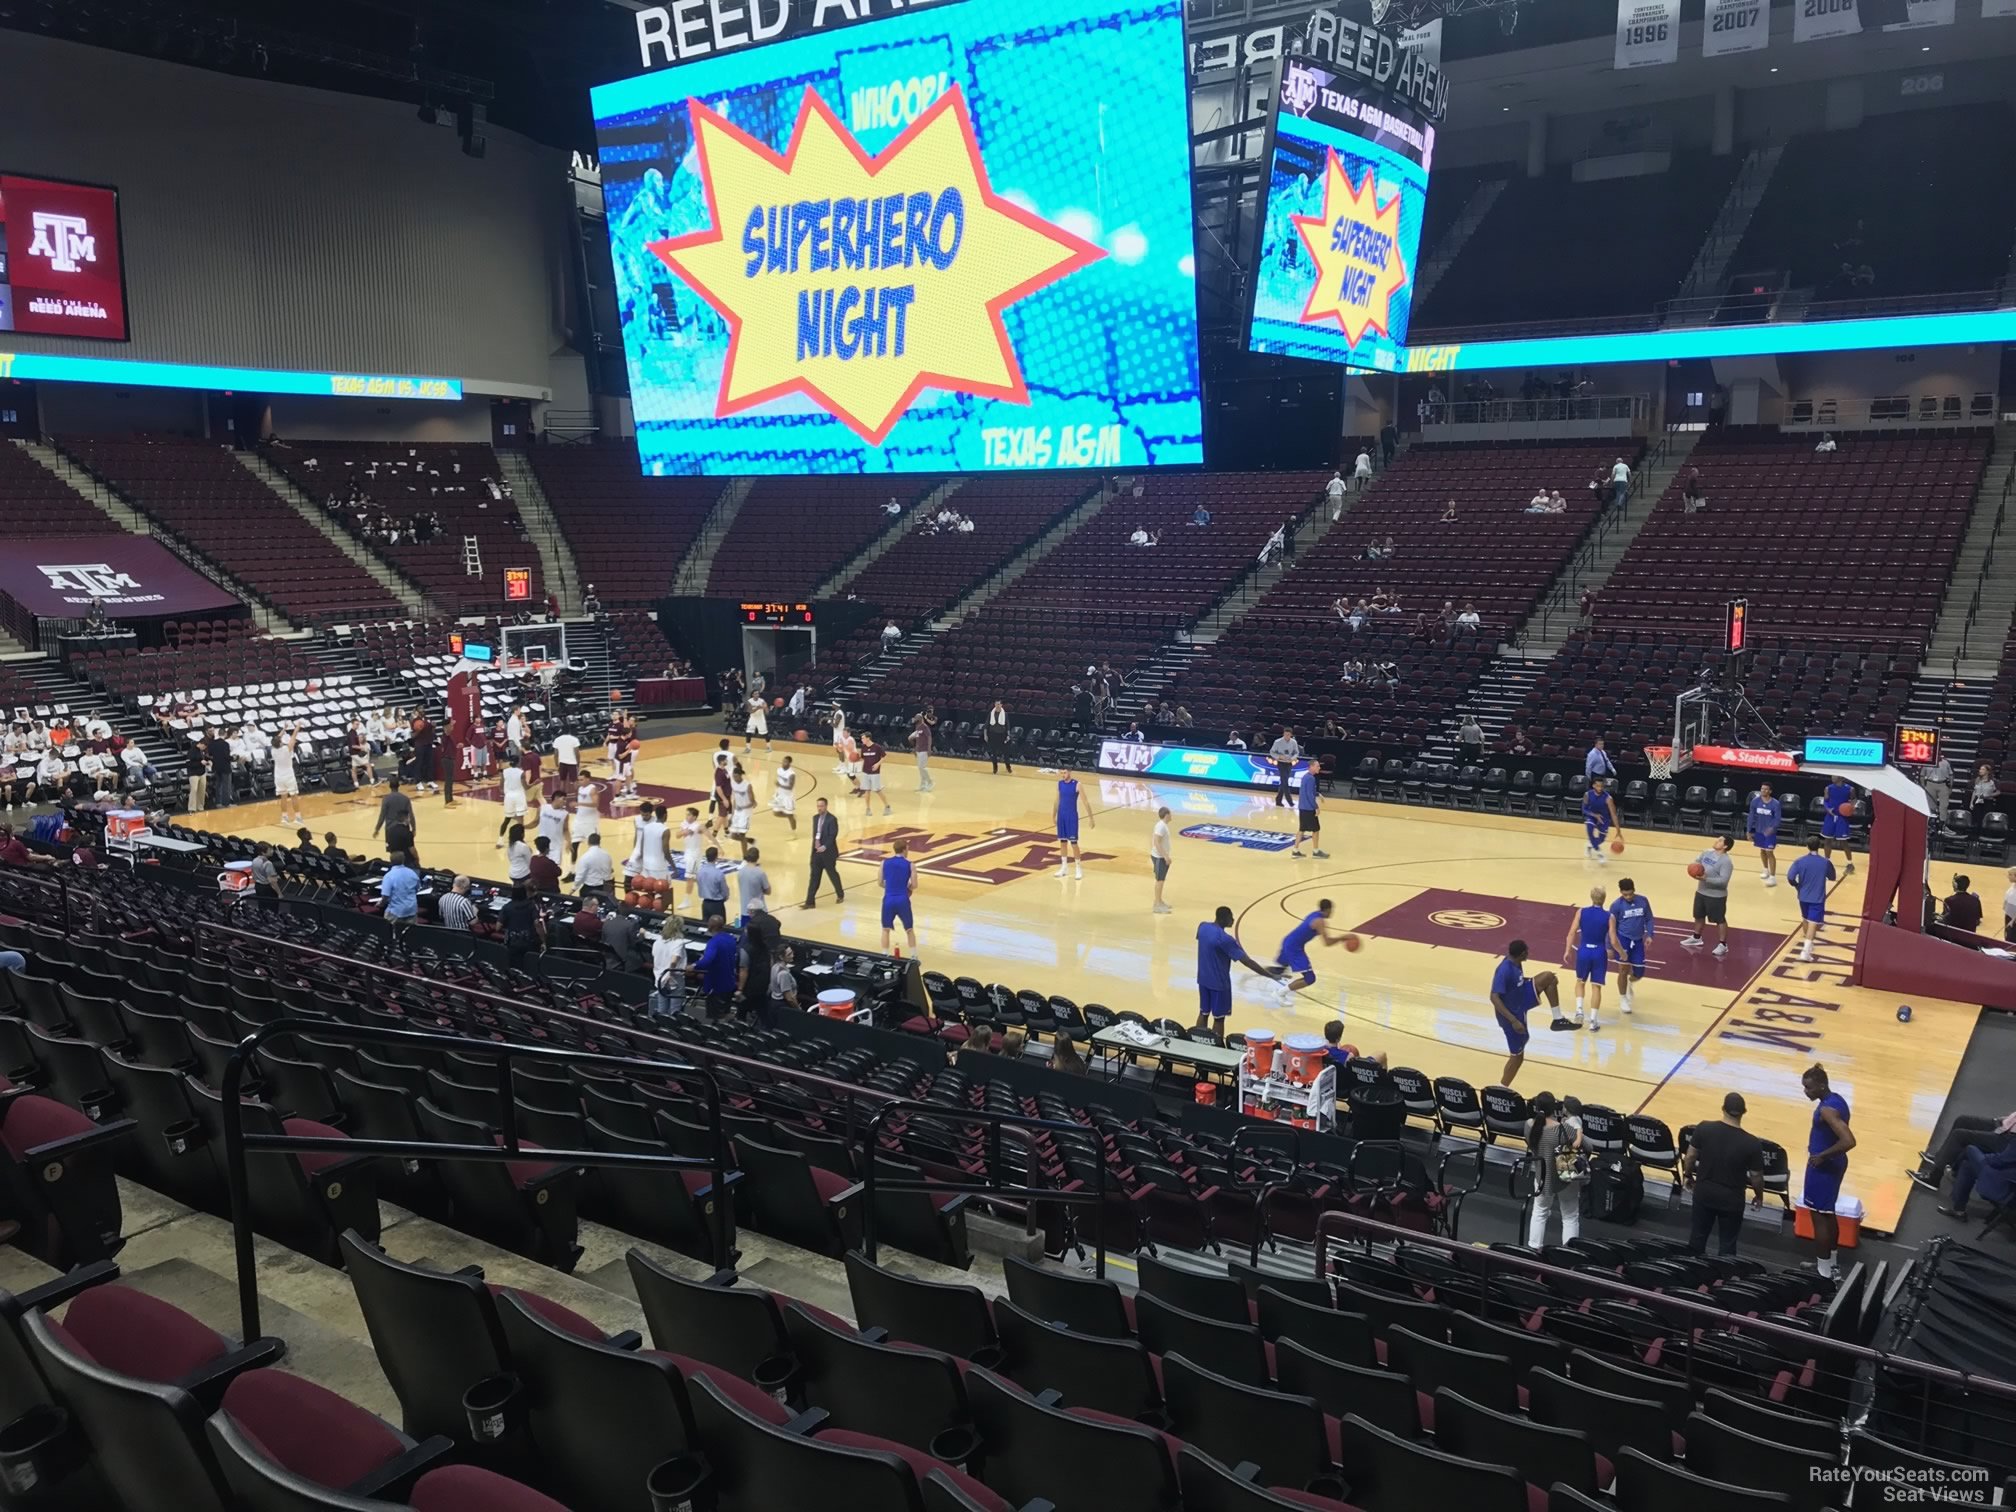 section 119, row j seat view  - reed arena